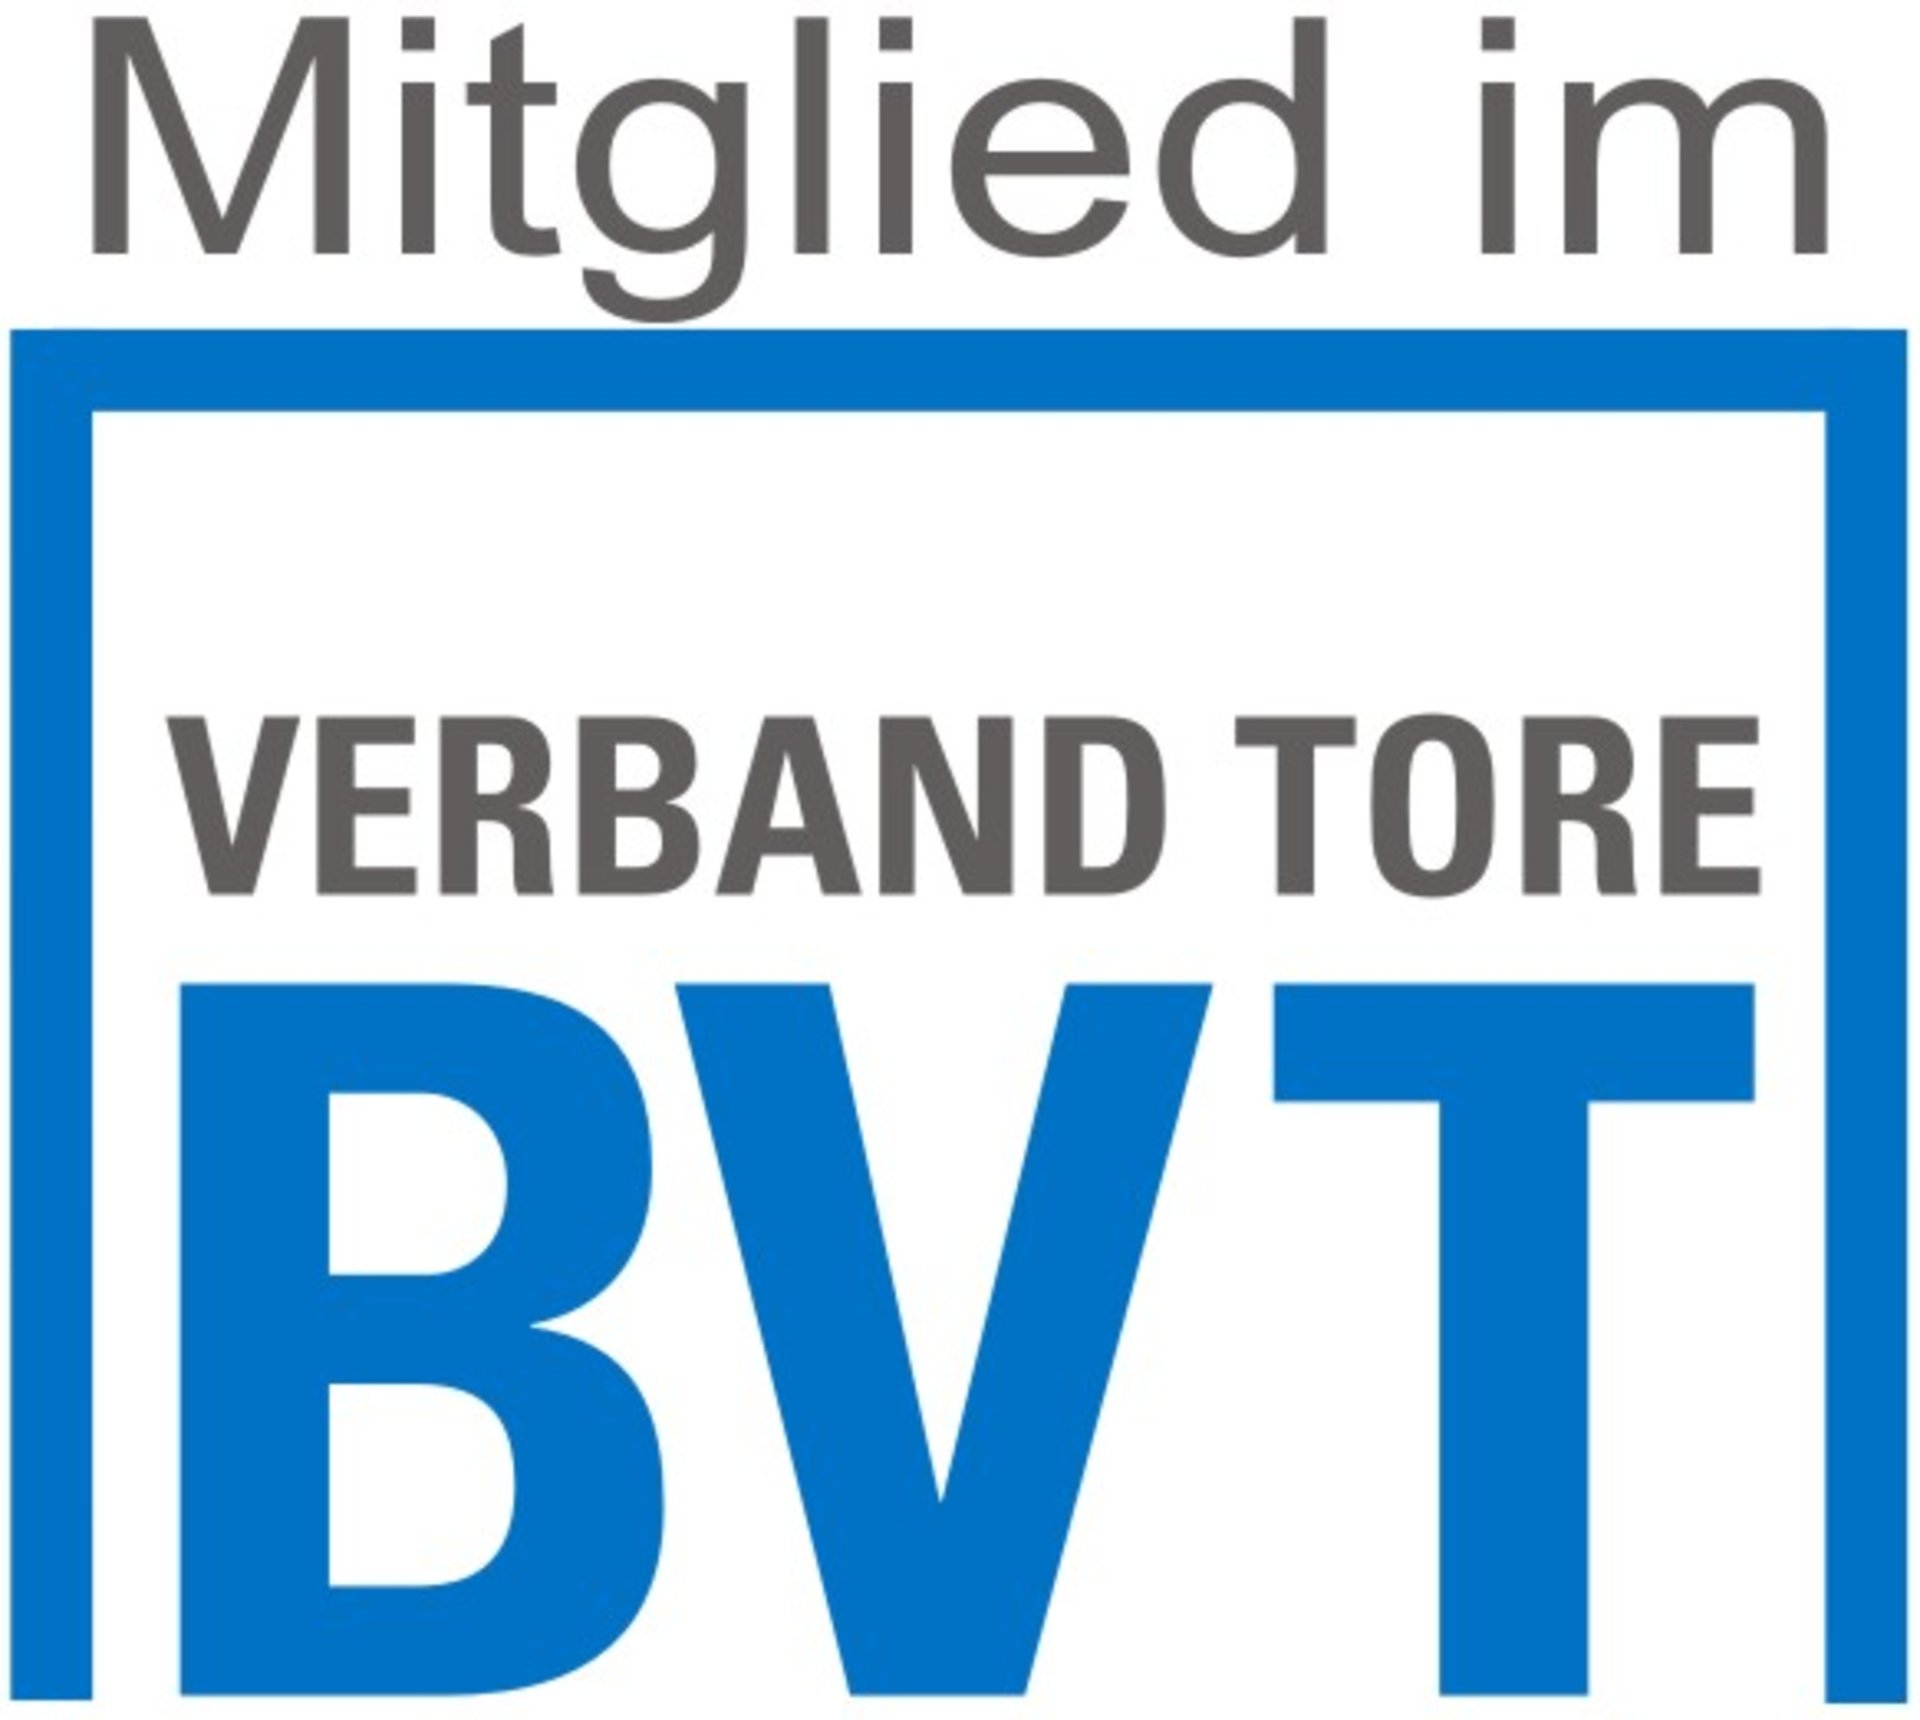 [Translate to Englisch:] BVT – Verband Tore